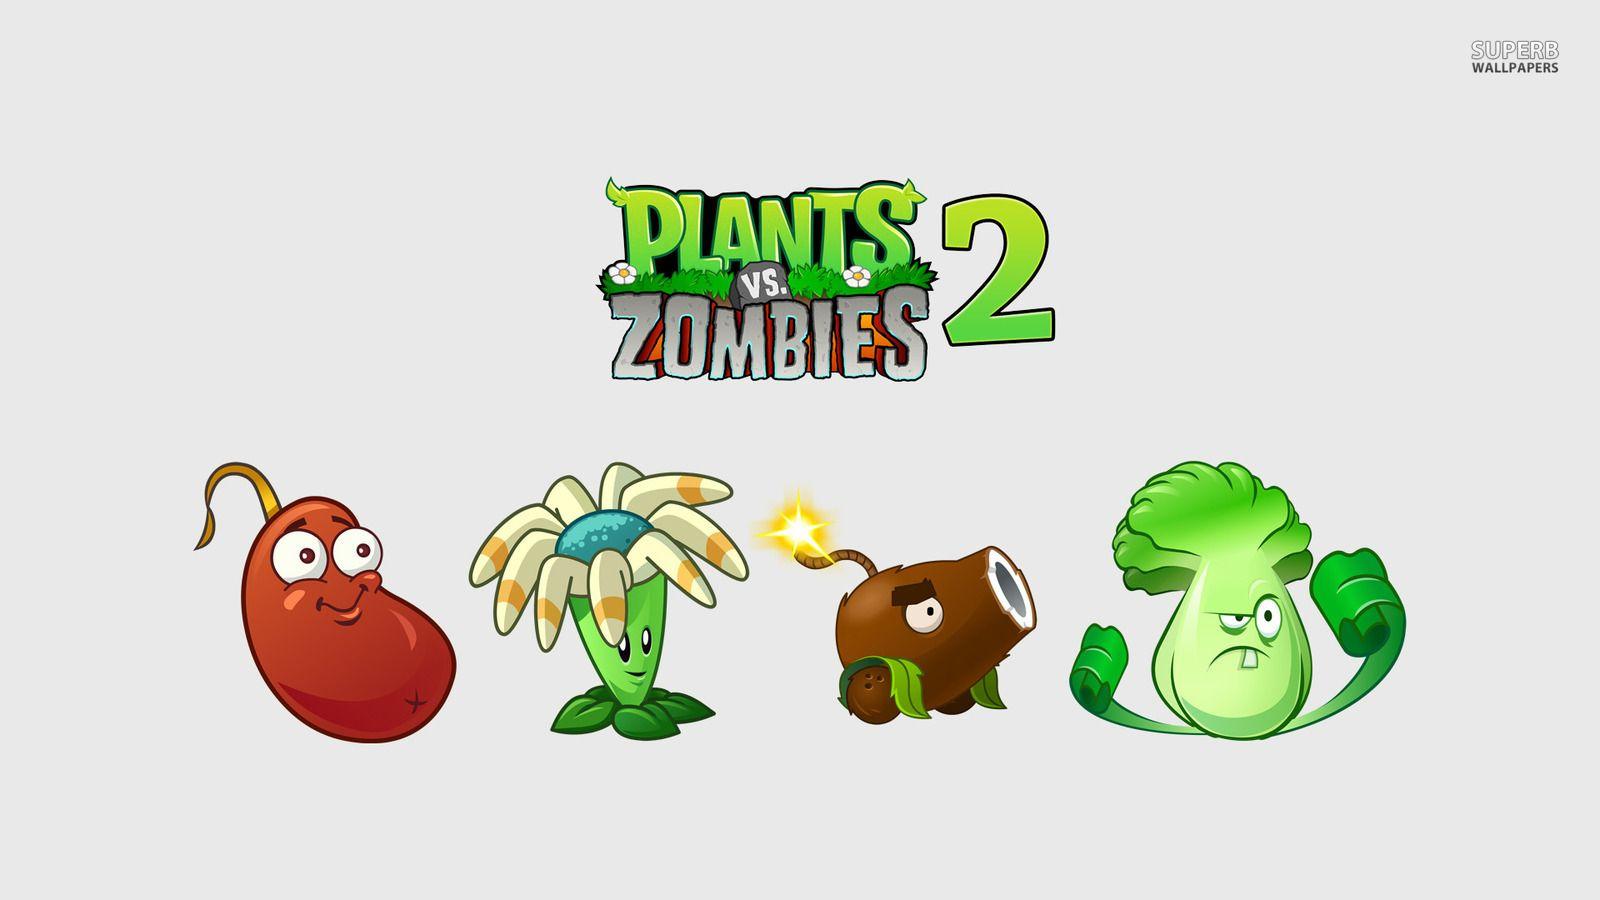 videogames immagini Plants vs. Zombies 2 HD wallpaper and background